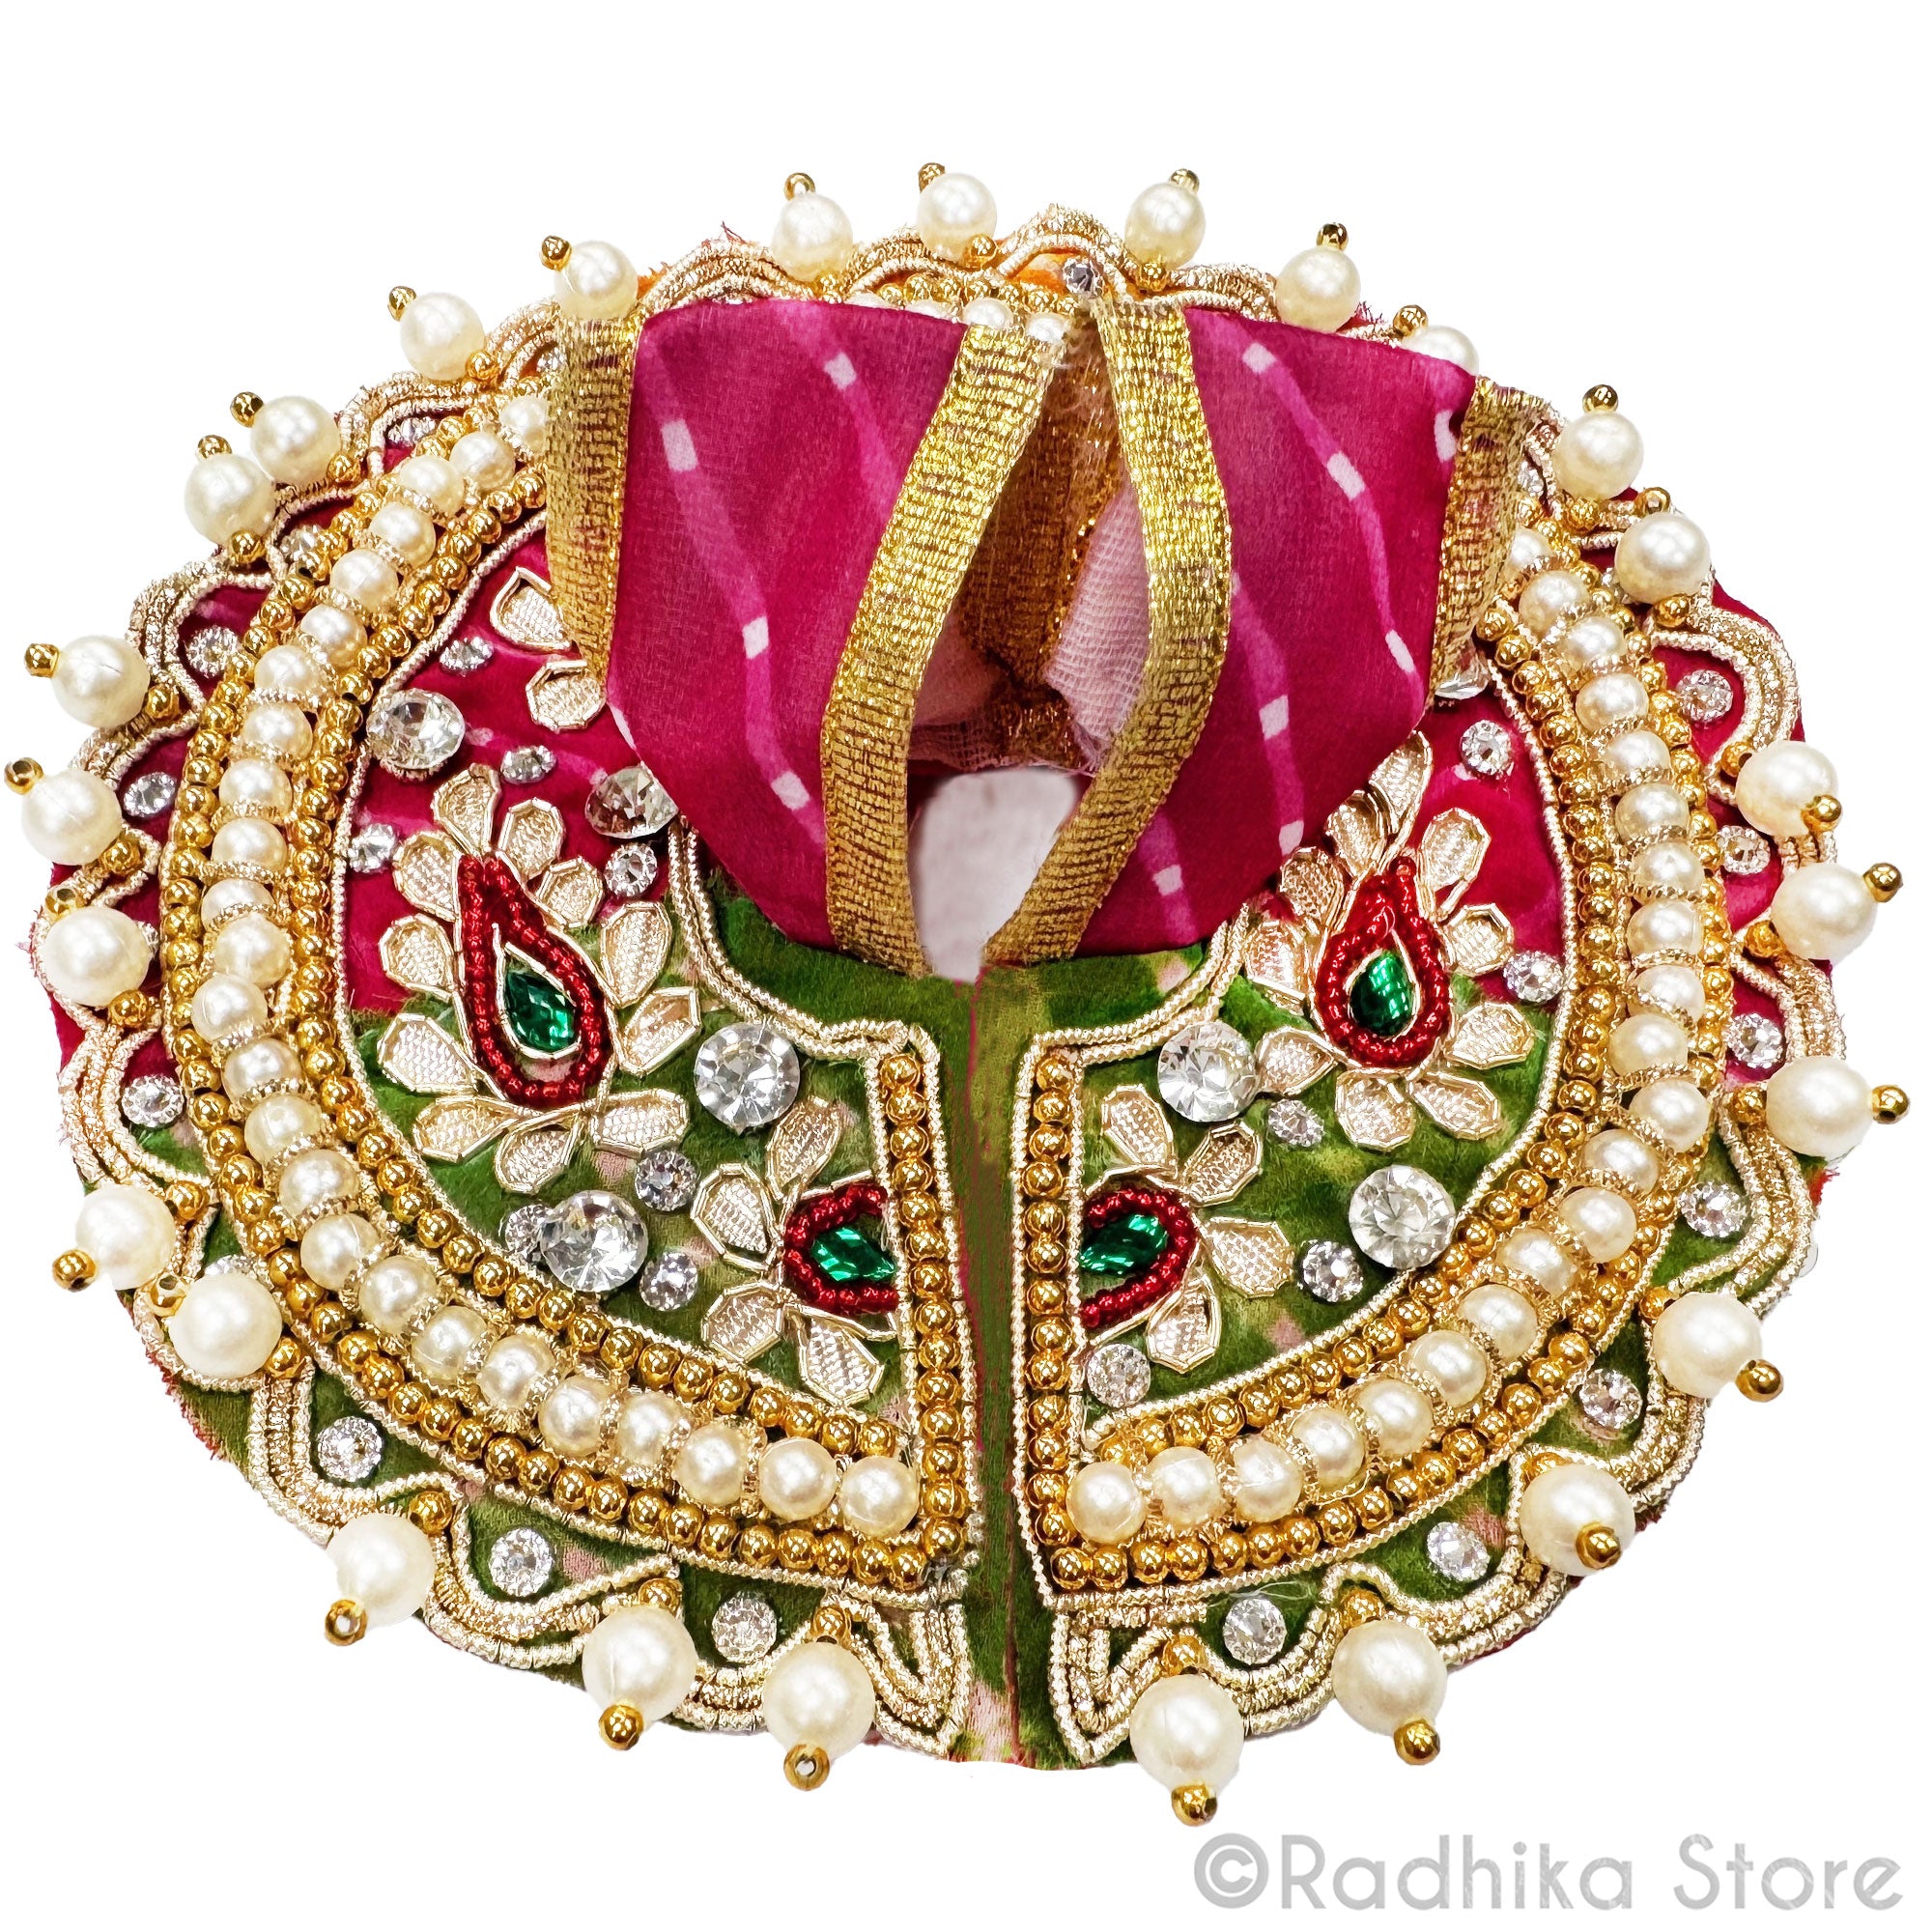 Rajasthan Gopal - Red and Green - Laddu Gopal Outfit